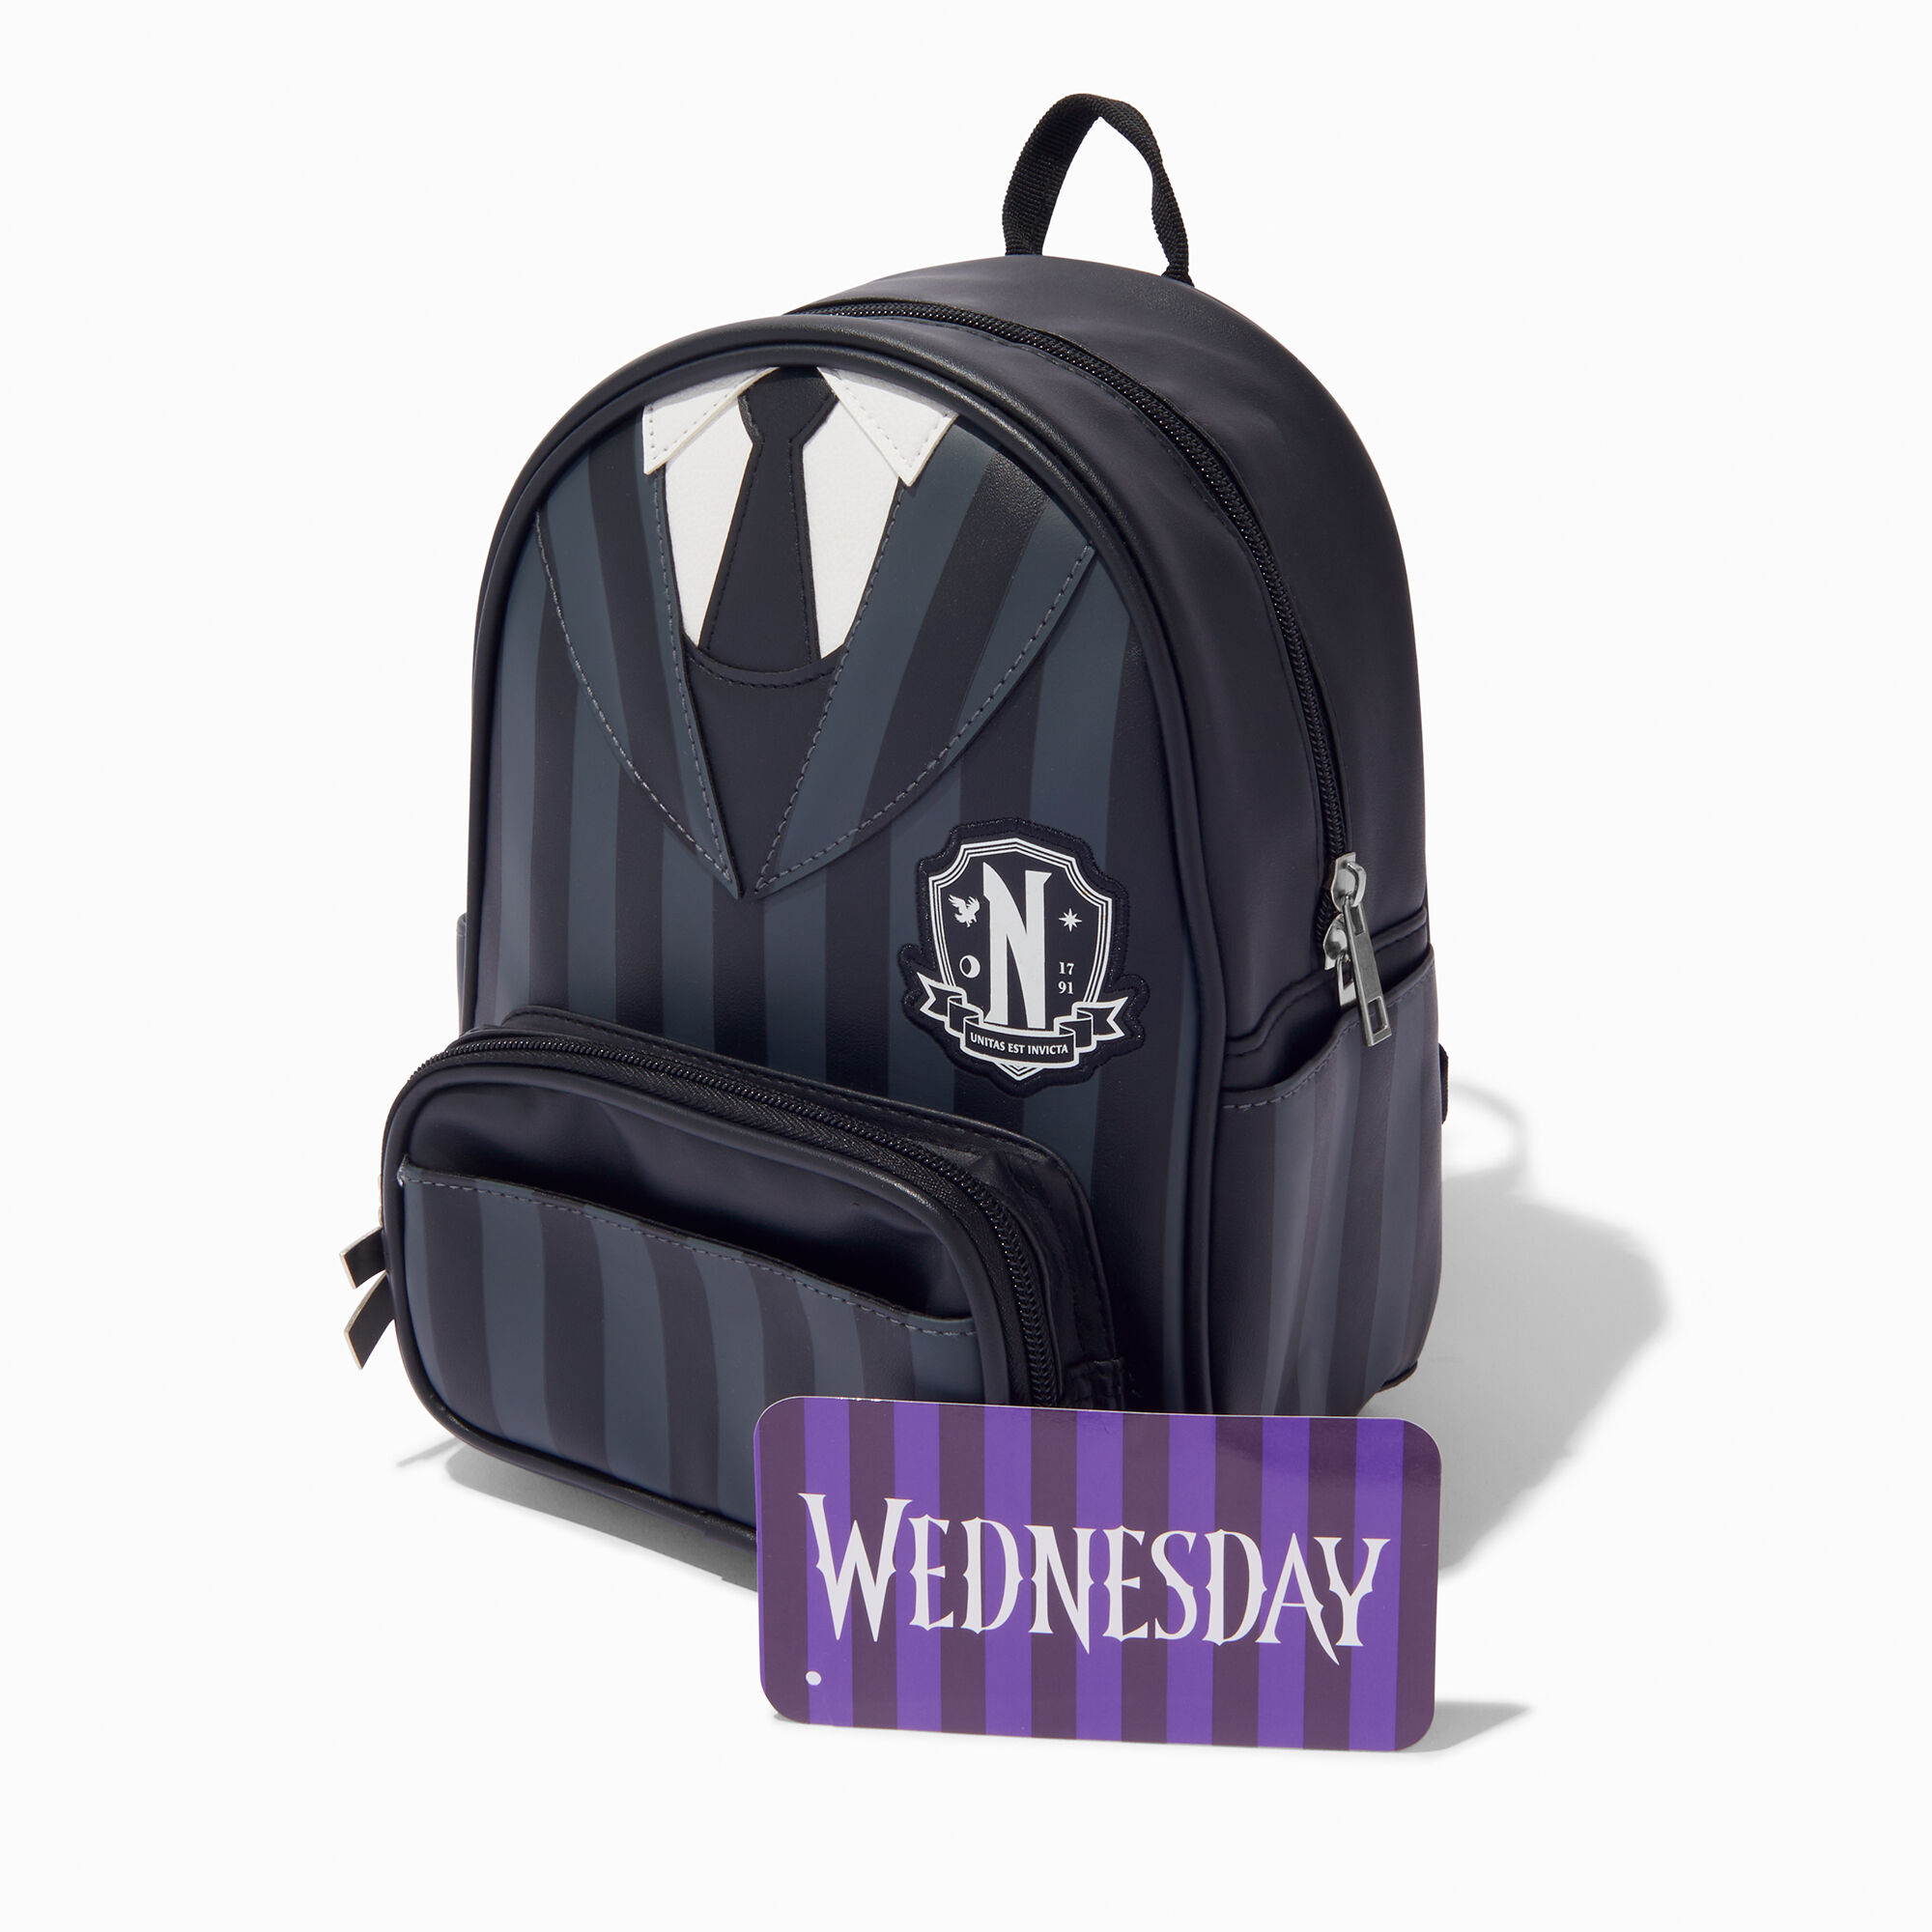 View Claires Wednesday Uniform Backpack information